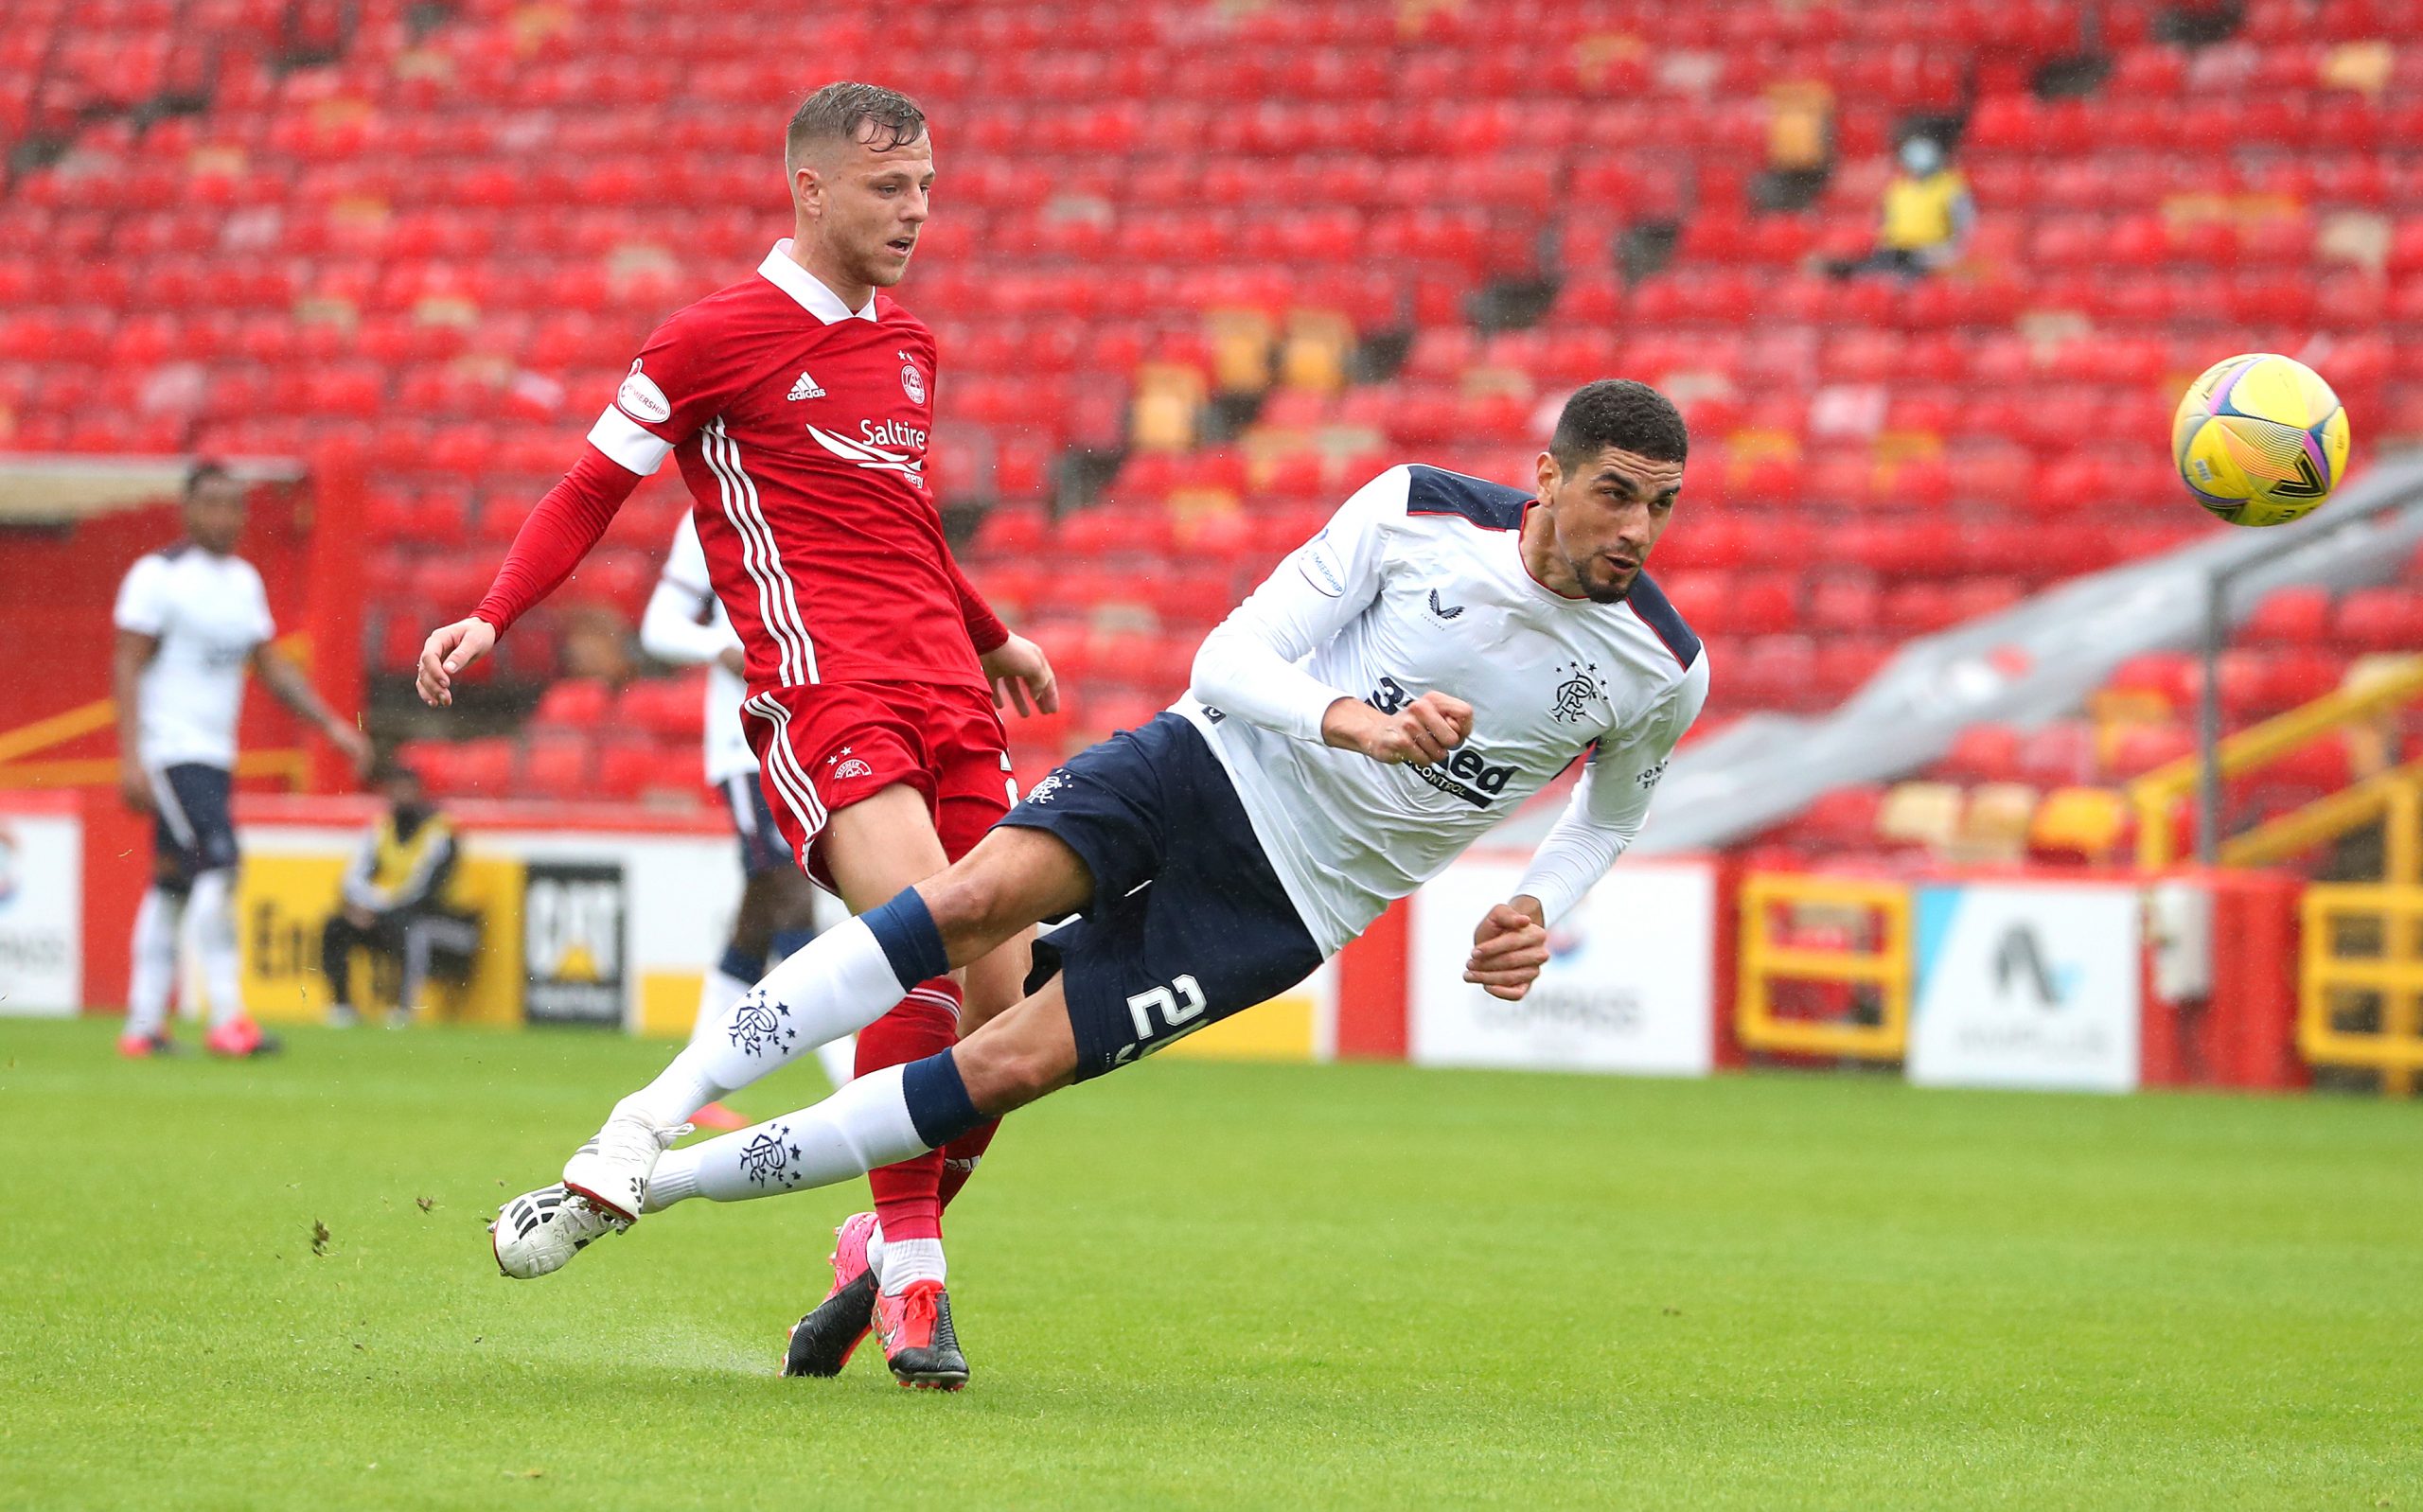 ABERDEEN, SCOTLAND - AUGUST 01: Bruce Anderson of Aberdeen is challenged by Leon Balogun of Rangers FC during the Ladbrokes Premiership match between Aberdeen and Rangers at Pittodrie Stadium on August 01, 2020 in Aberdeen, Scotland. (Photo by Andrew Milligan/Pool via Getty Images)